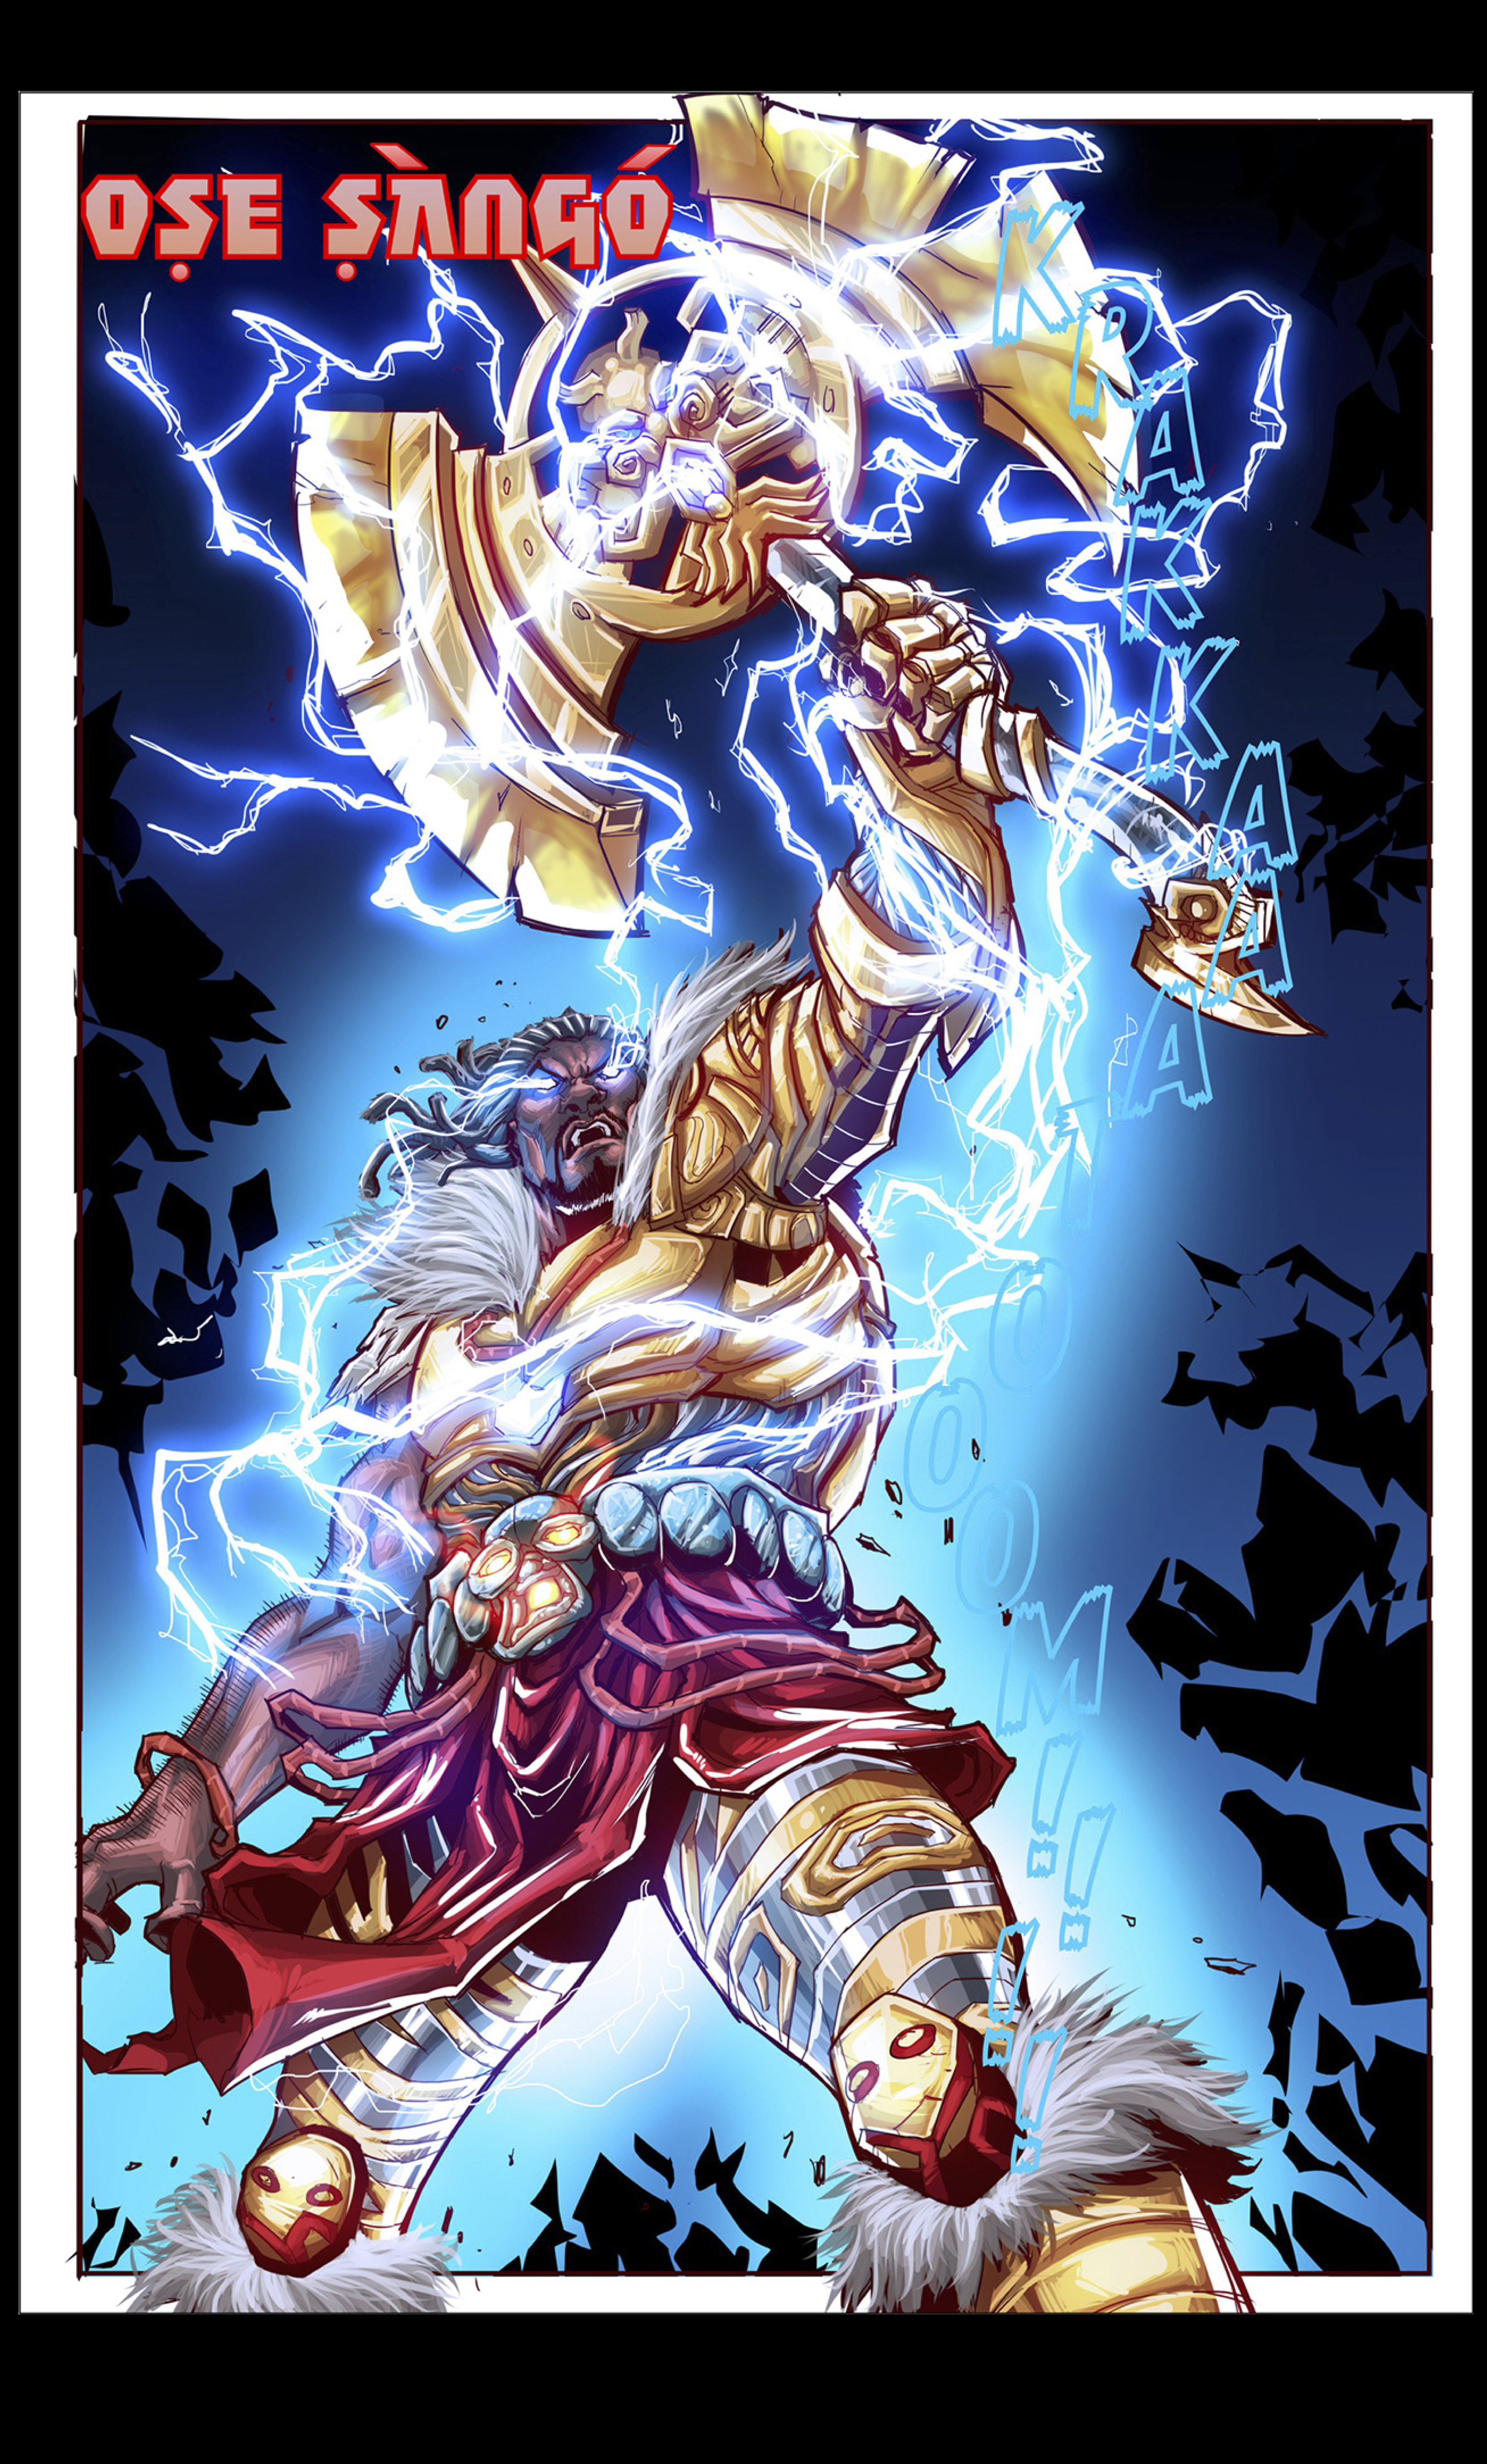 Awesome Page from Visionary Ascension comic where Sango displays his full power by bringing out his lightning axe, and clad in golden armor